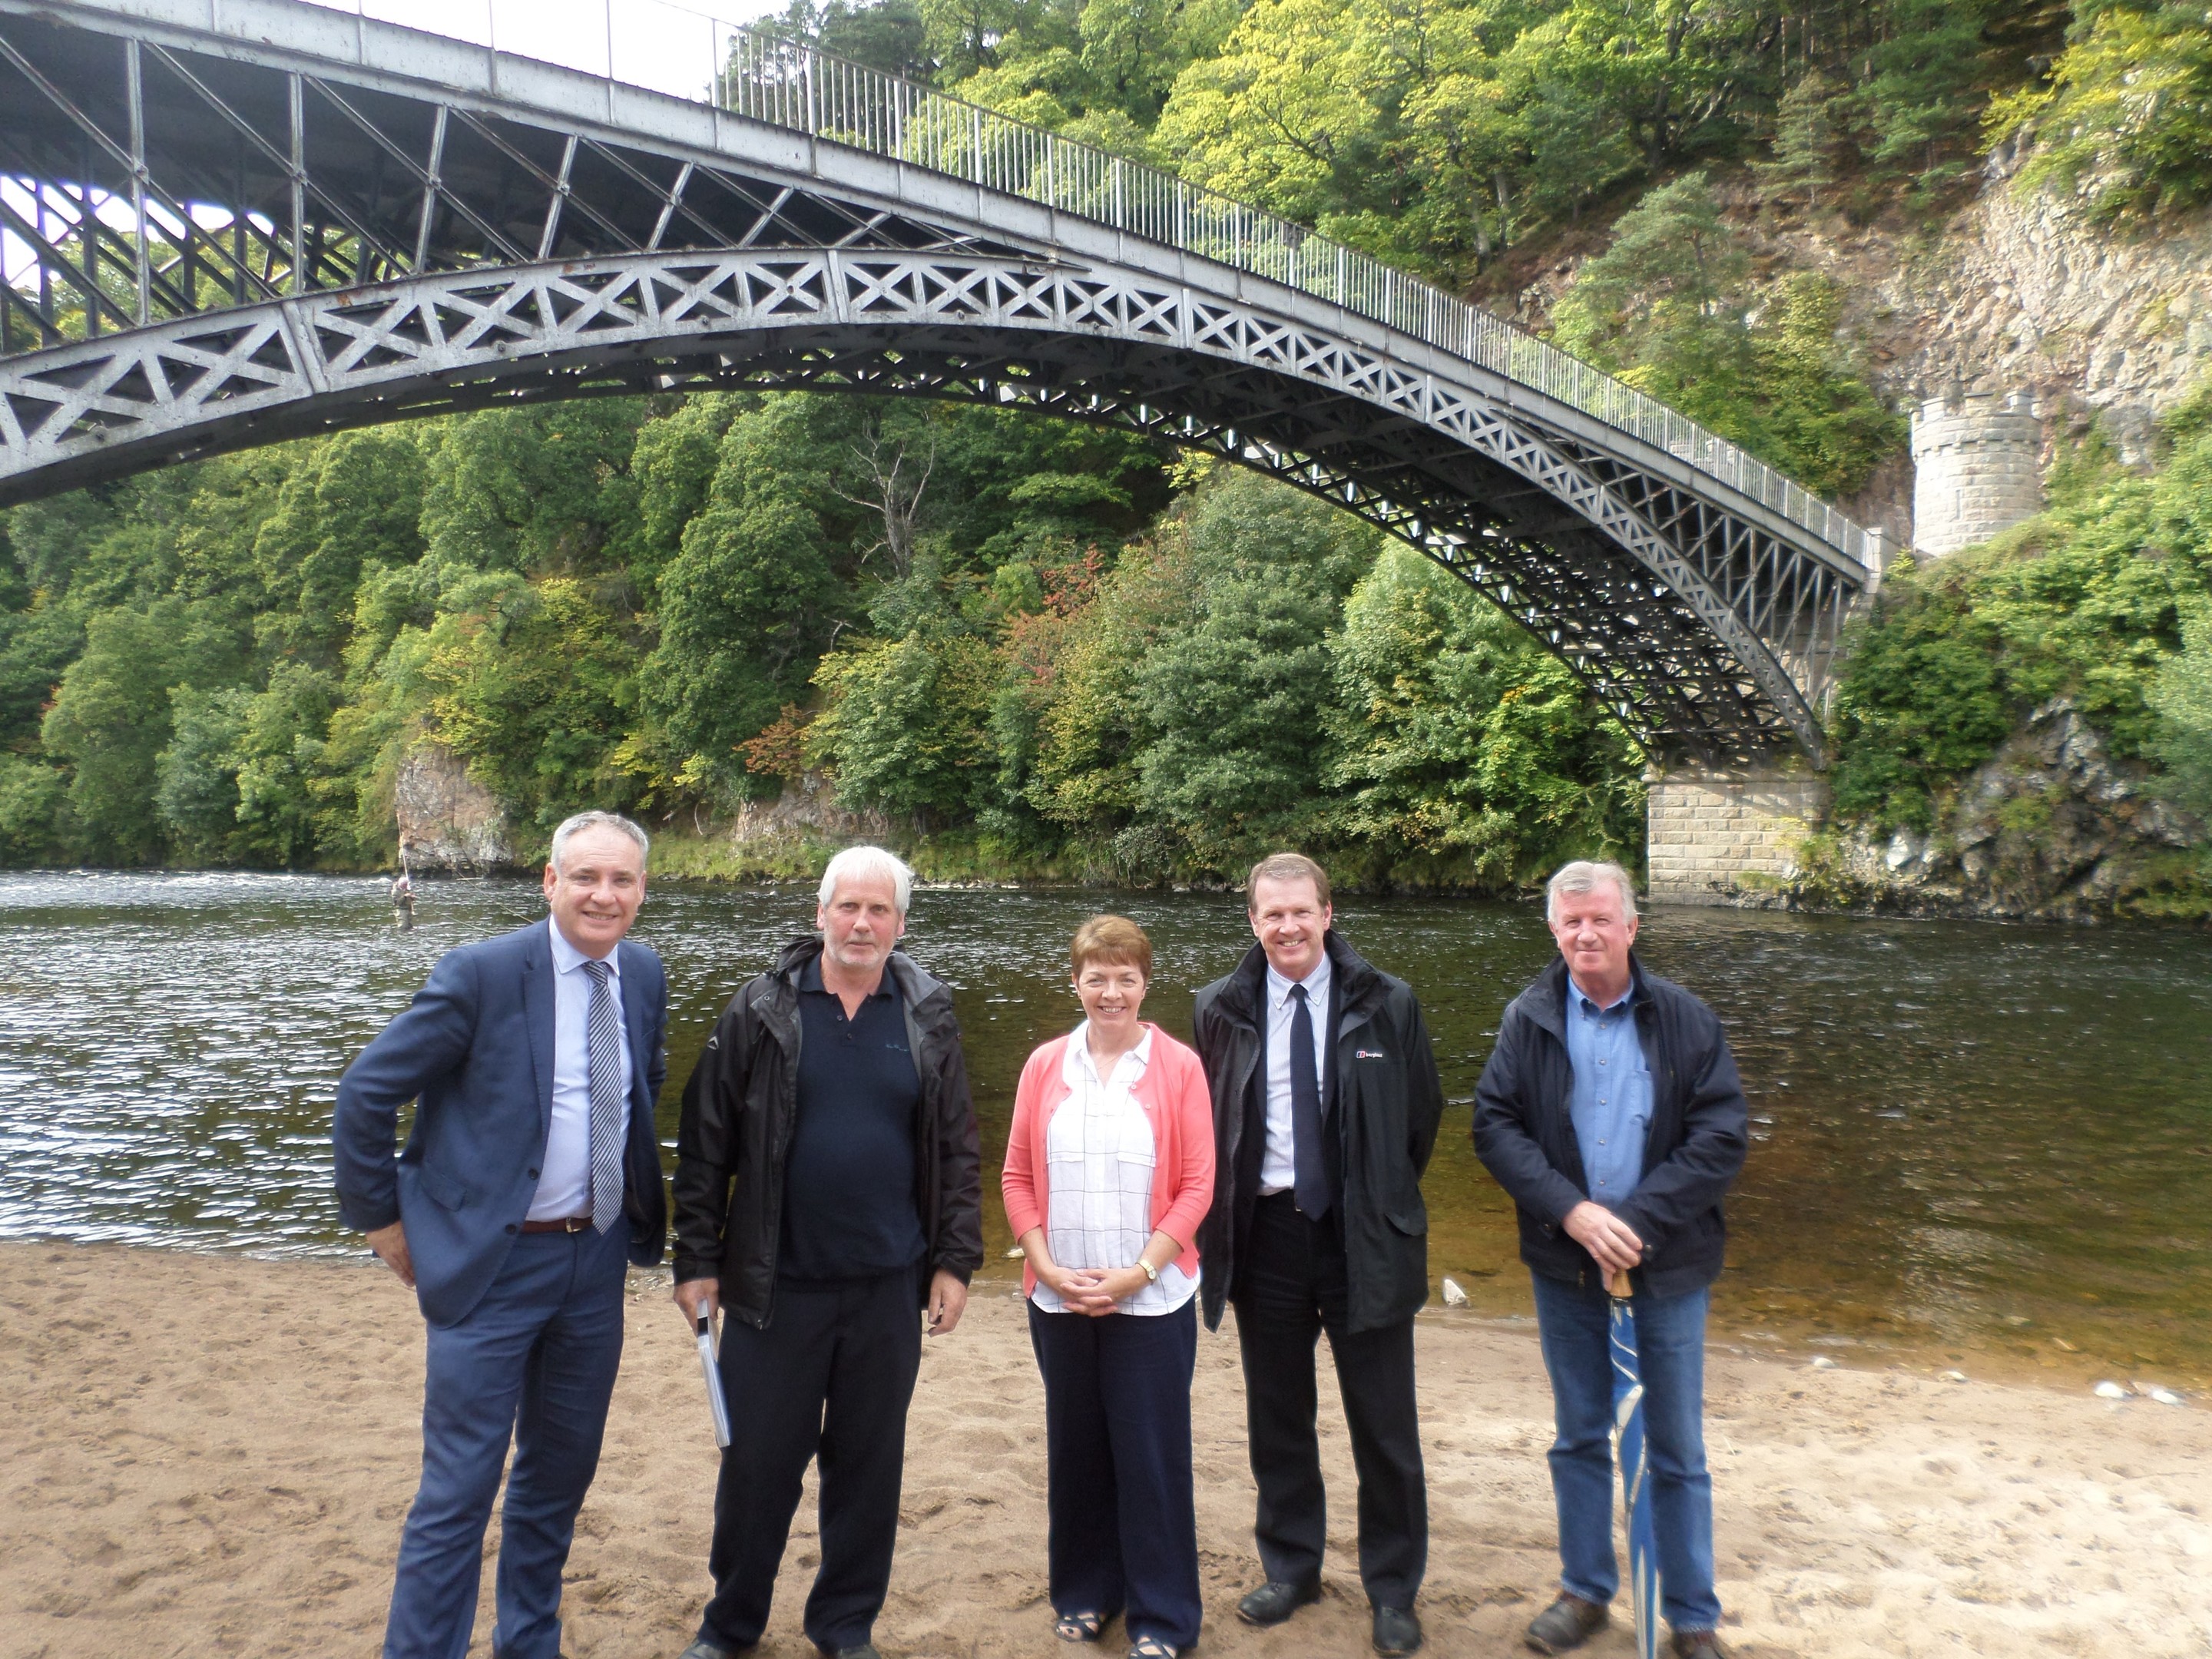 The Craigellachie bridge is more than 200 years old. Pictured: Moray MSP Richard Lochhead, Chairman of Friends of Craigellachie Bridge Campbell Croy, secretary Brenda Cooper, chief executive of Historic Environment Scotland, Alex Paterson, Friends of Craigellachie Bridge committee member Jock Anderson.